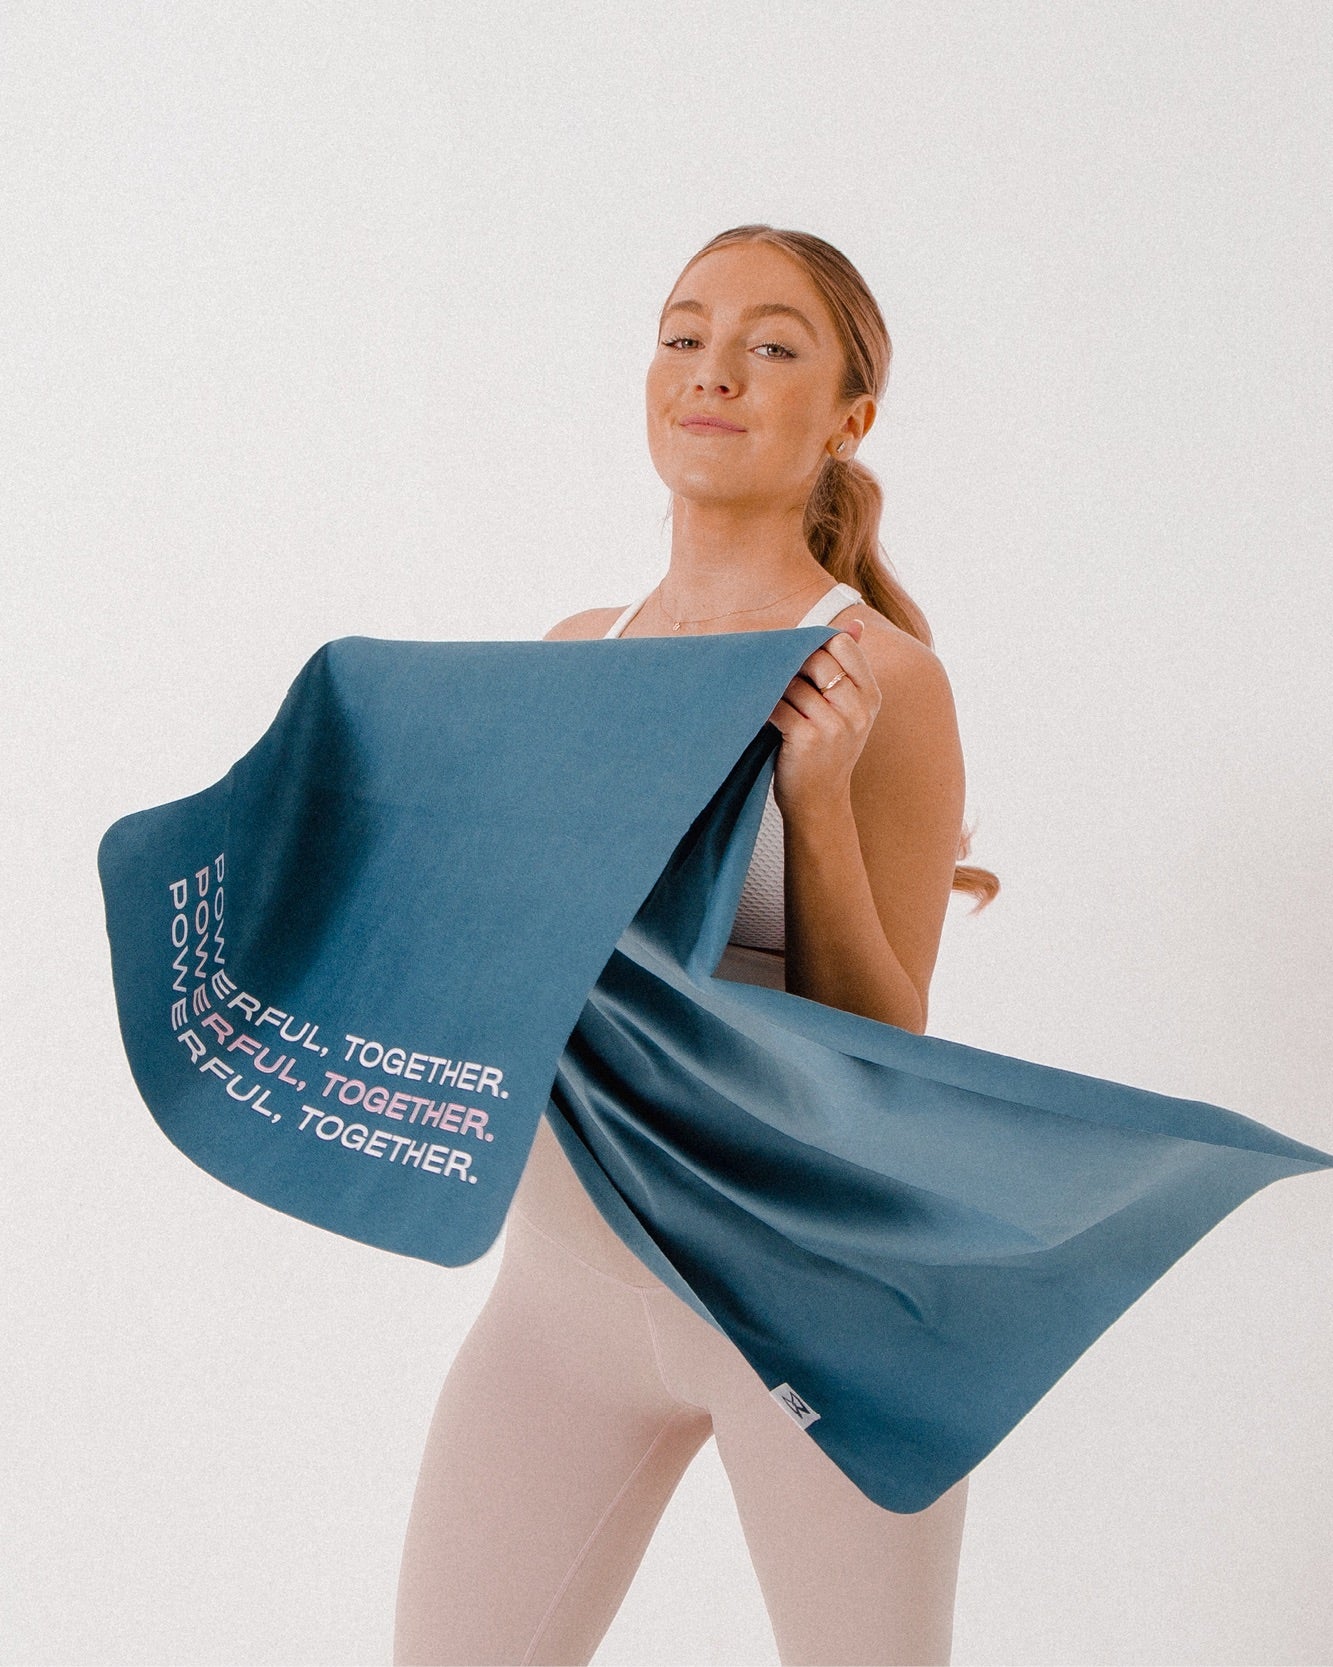 The best gym sweat towel to use in a workout! Full coverage to fit a yoga matt & made of soft material to absorb sweat + dry fast. Best Australian sweat towel.